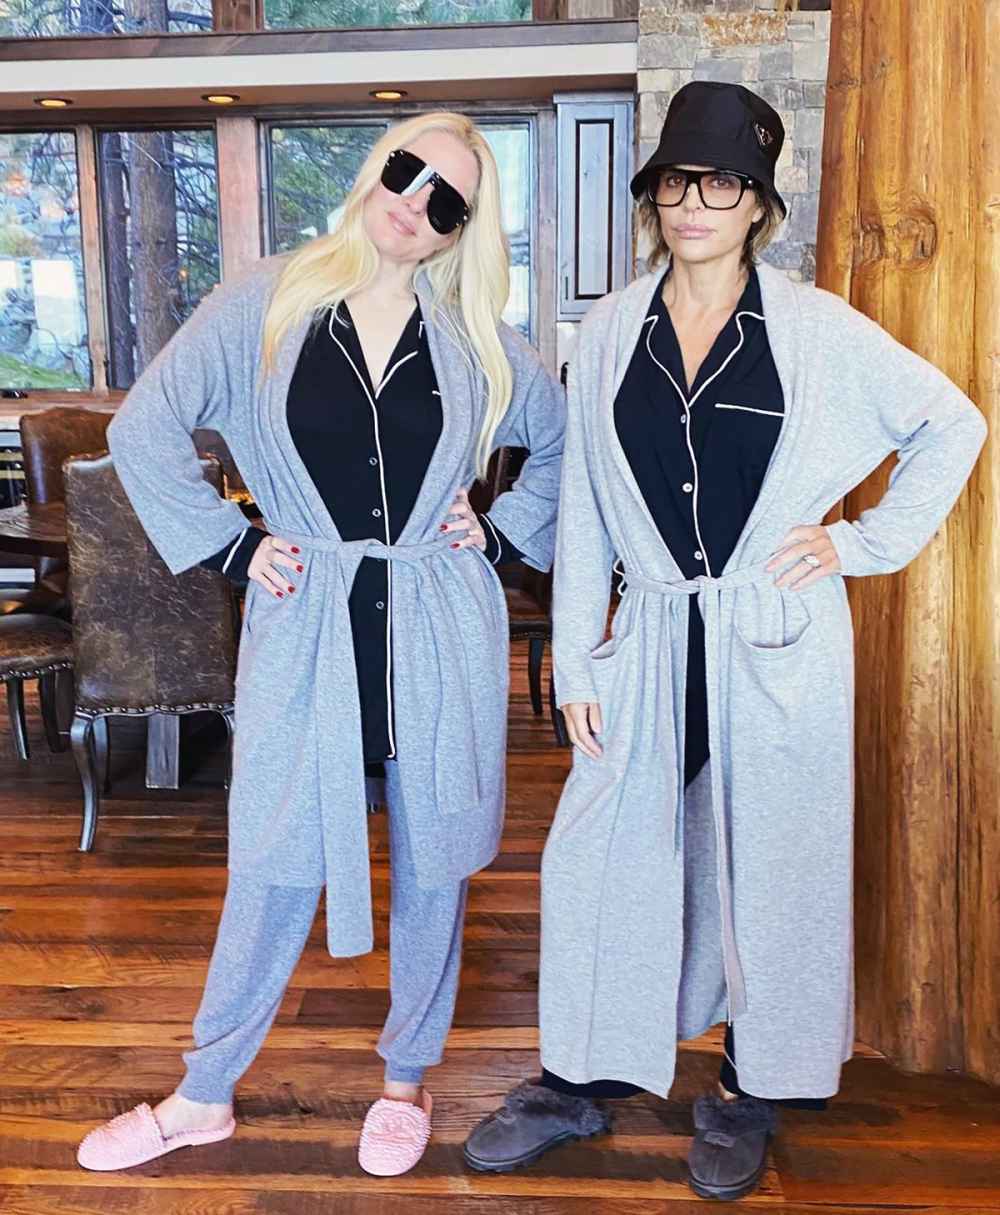 'Real Housewives' Stars Lisa Rinna and Erika Jayne Twin in Super Chic PJs